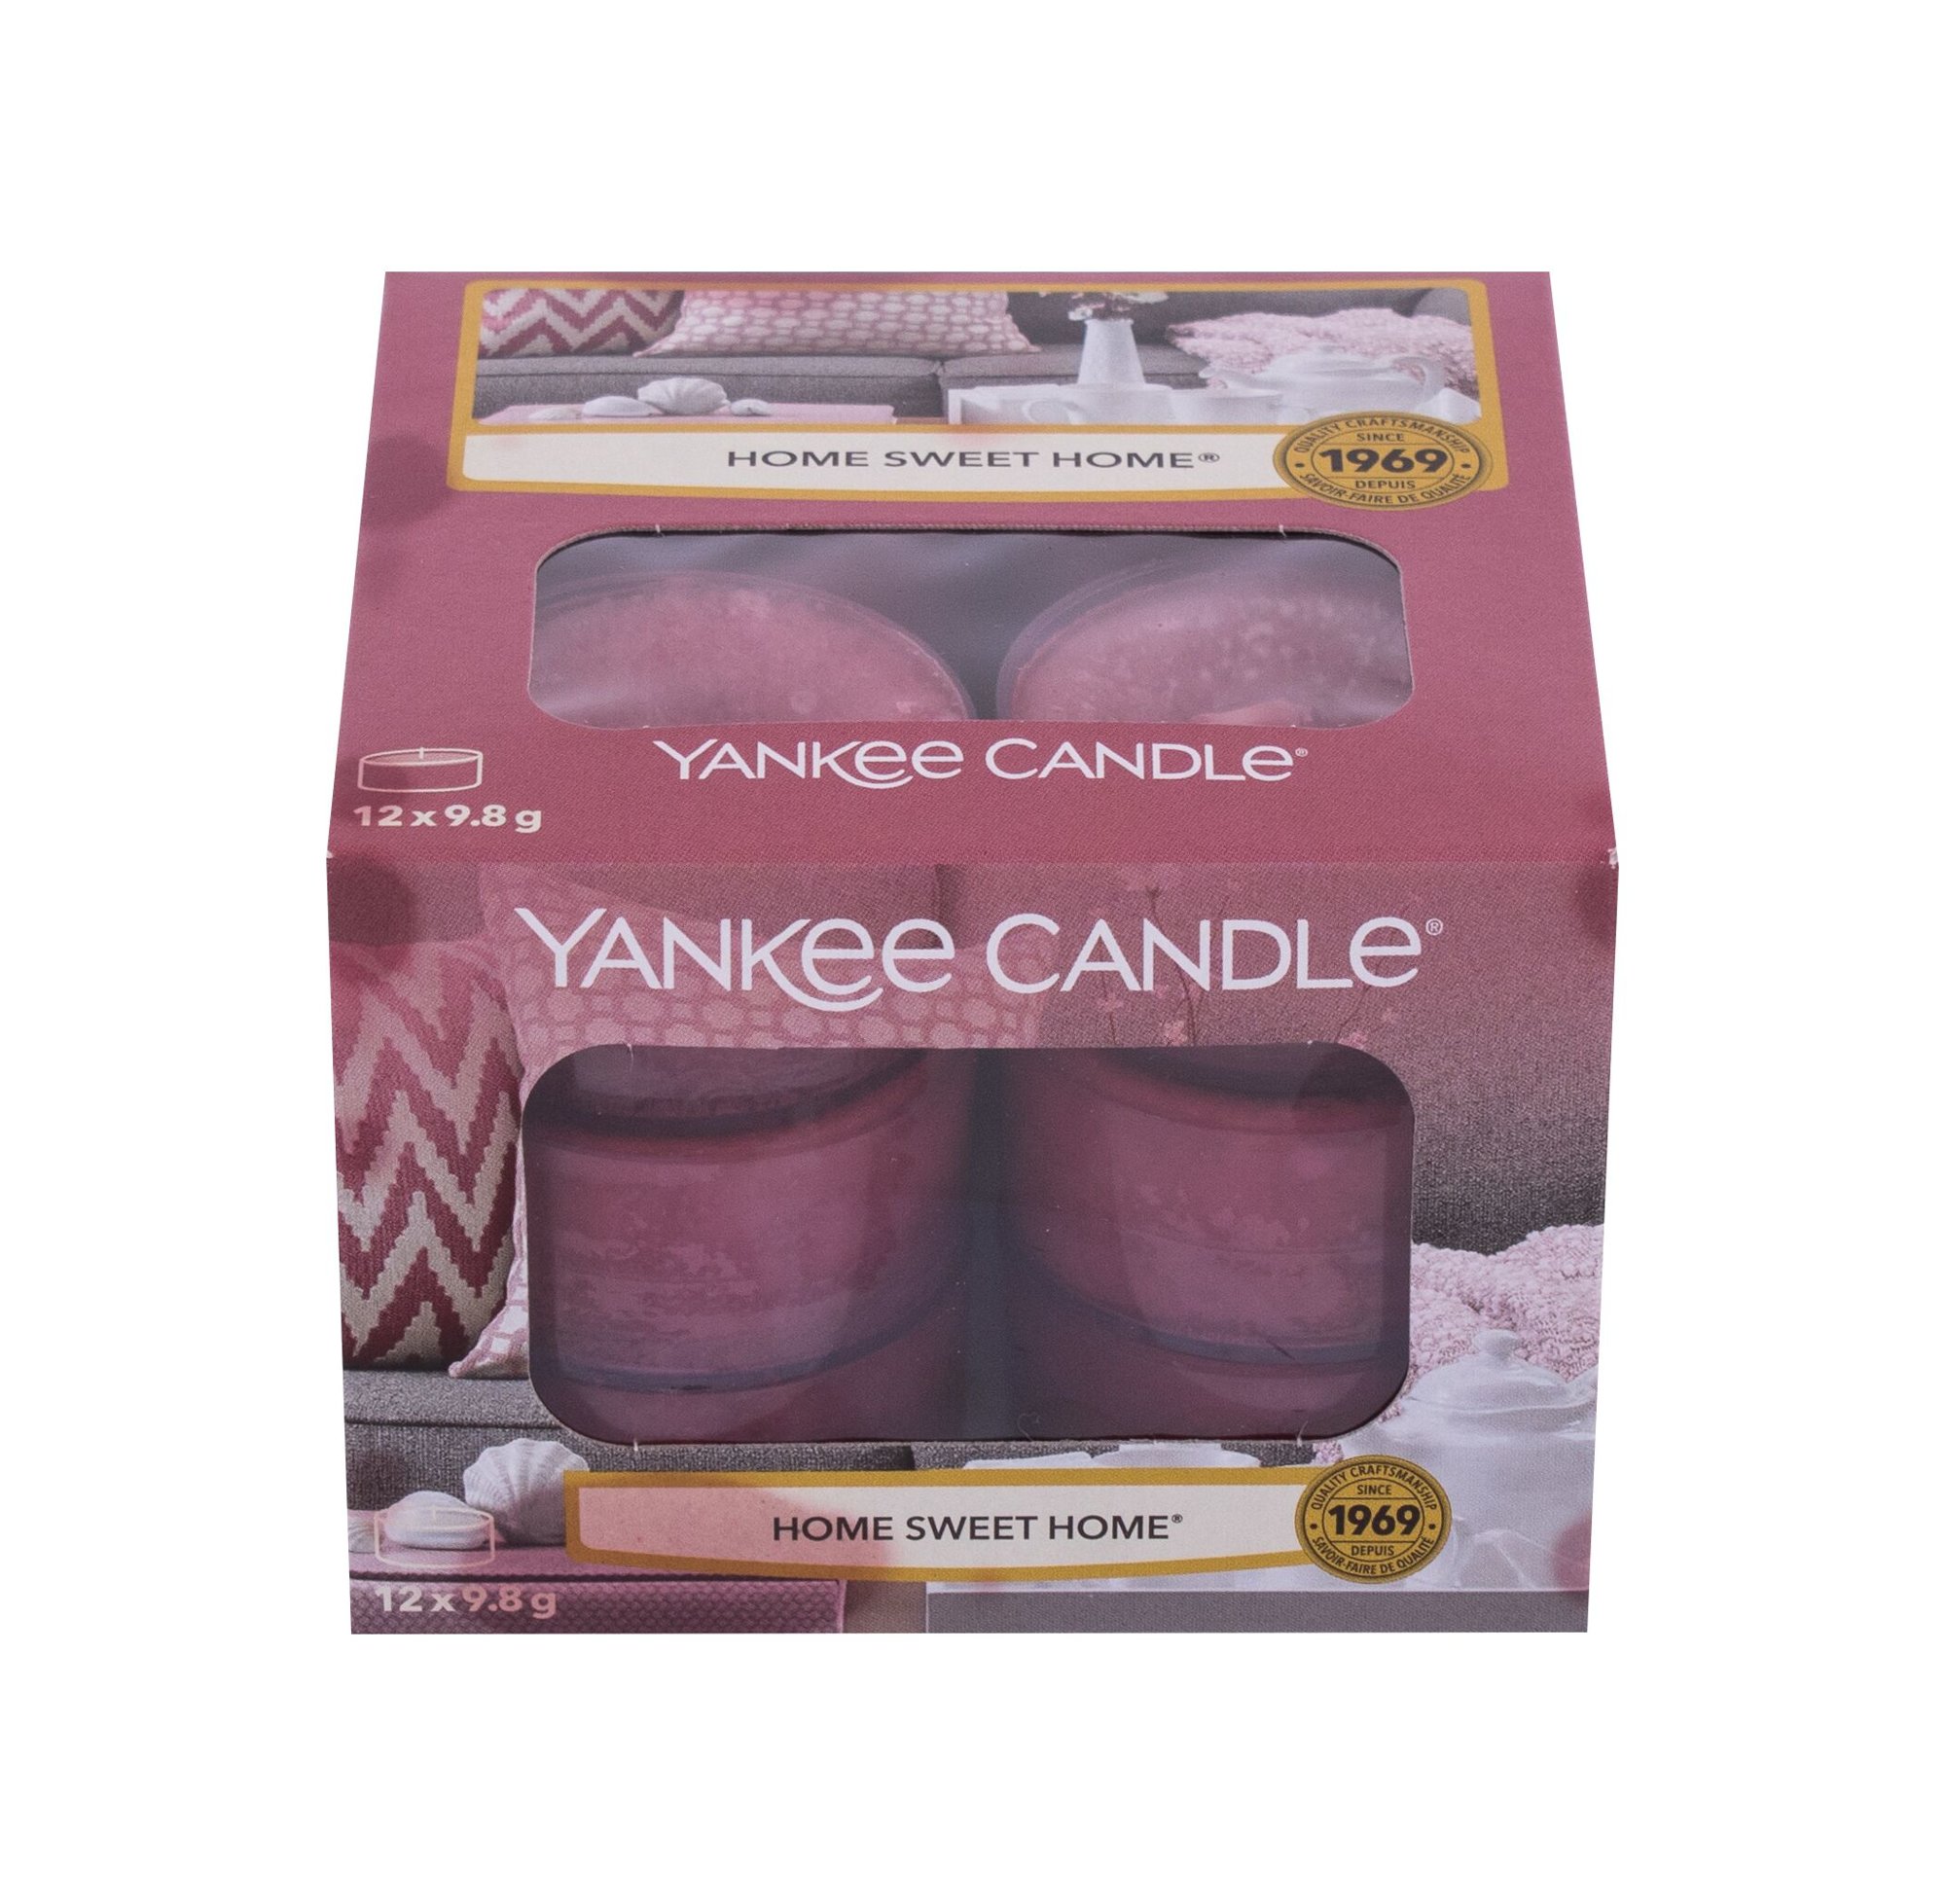 Yankee Candle Home Sweet Home 117,6g Kvepalai Unisex Scented Candle